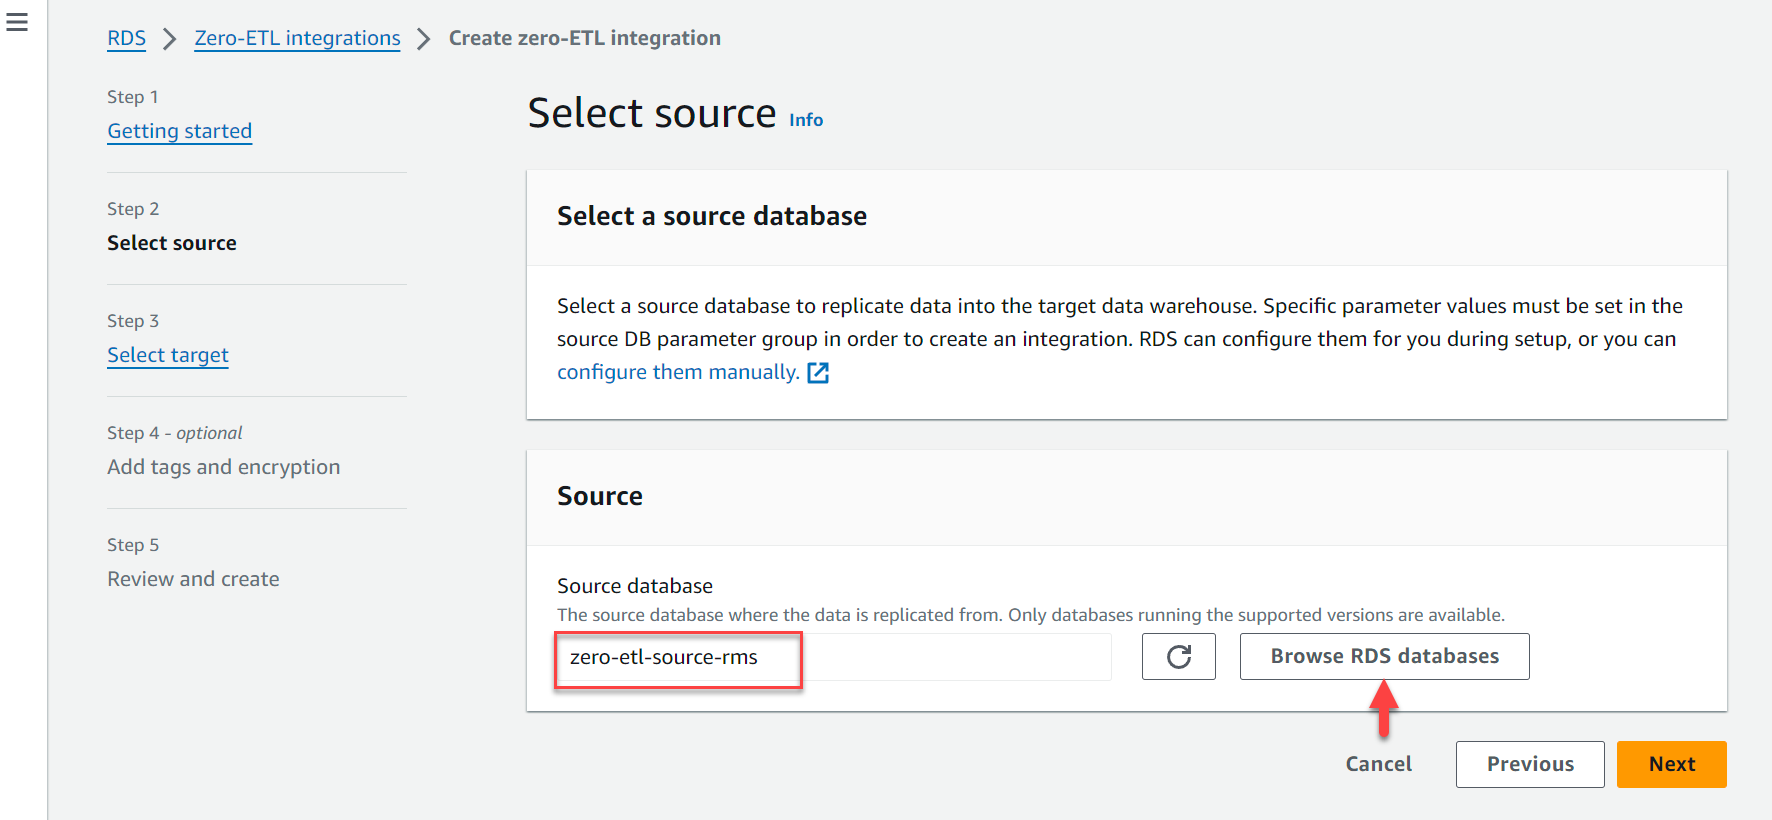 Browse RDS databases for zero-ETL source